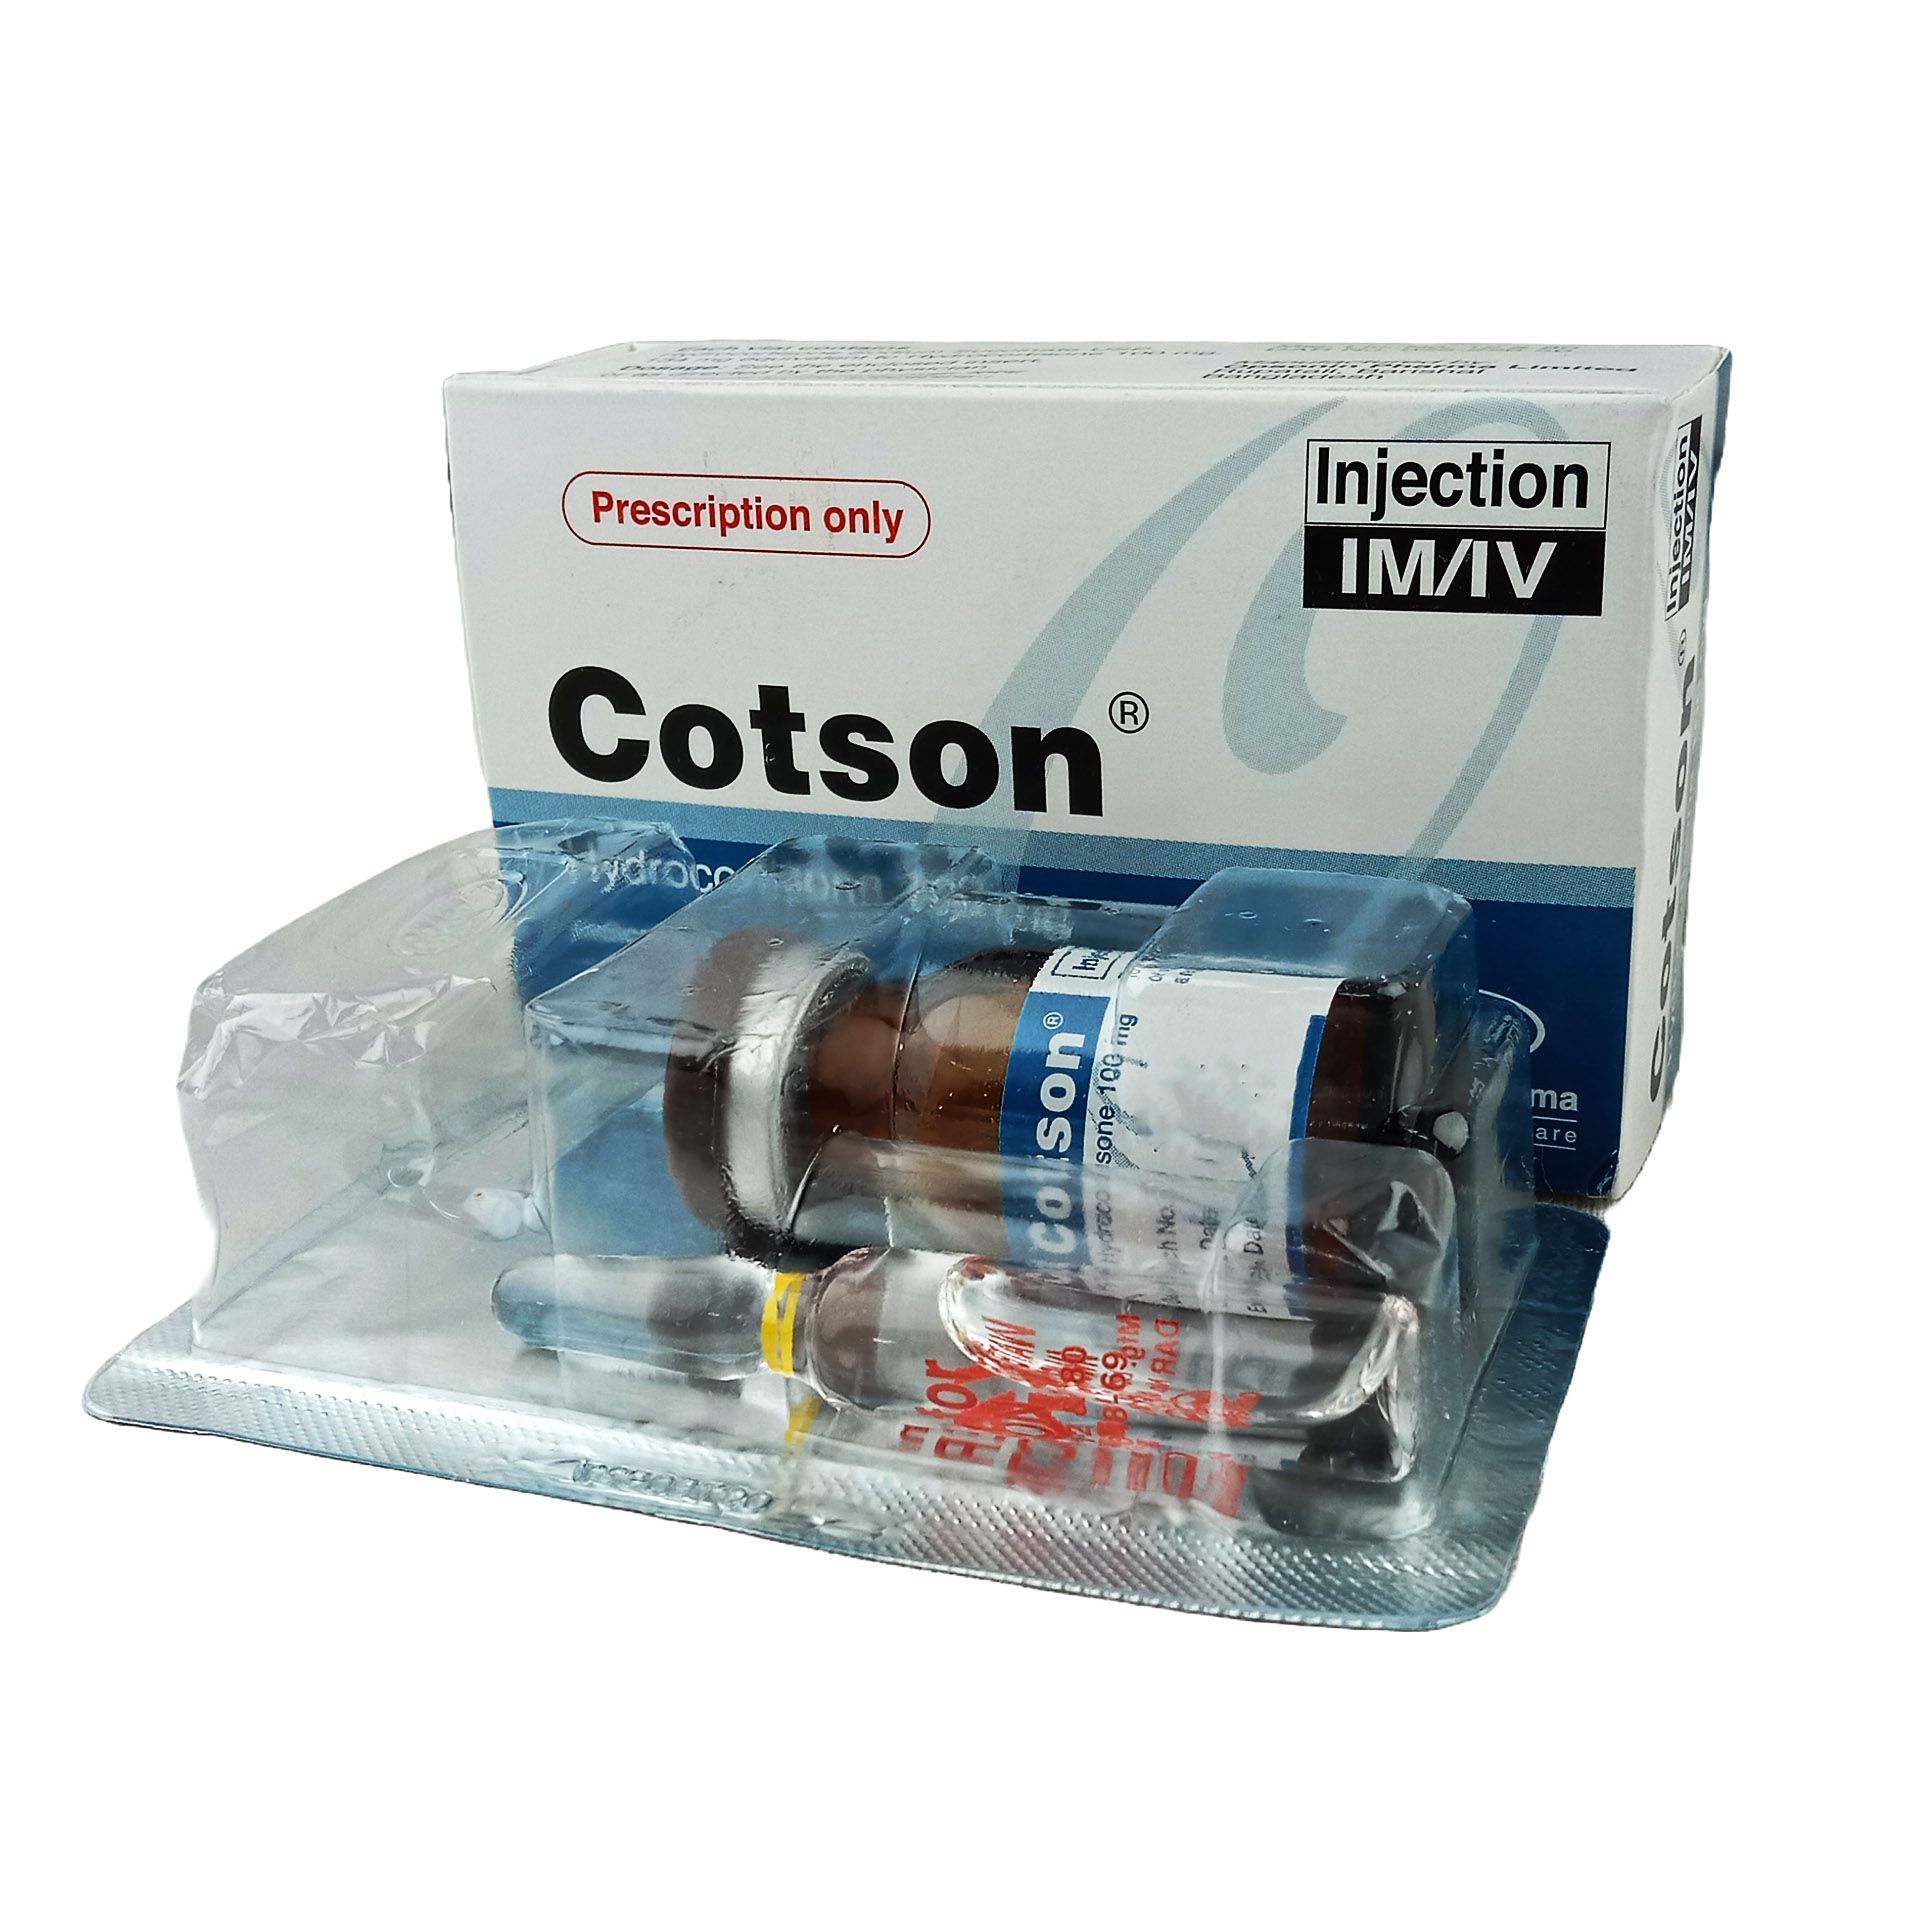 Cotson 100mg/2ml Injection